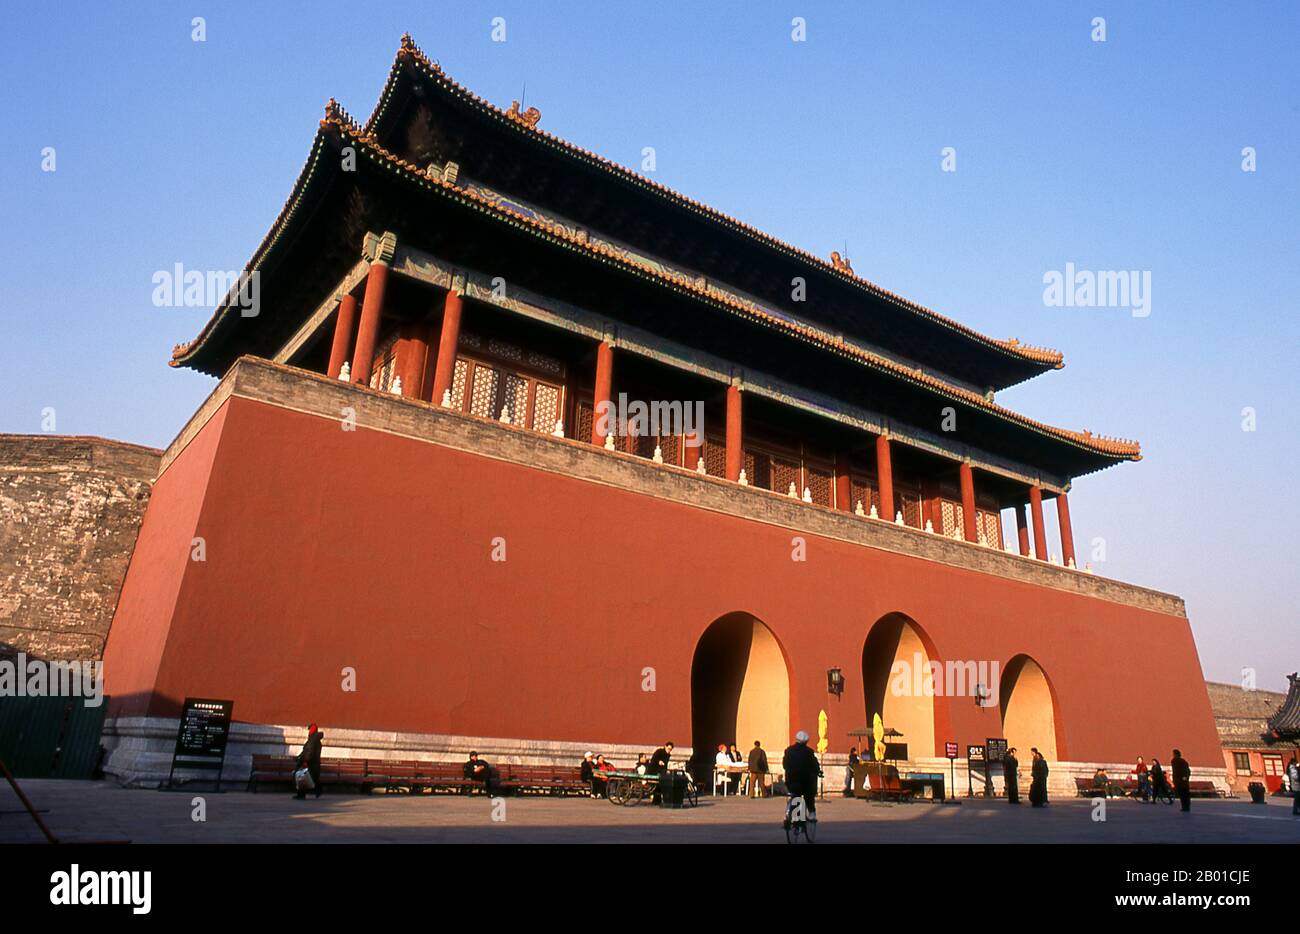 China: Gate of Divine Prowess (Shenwumen), The Forbidden City (Zijin Cheng), Beijing.  The Gate of Divine Prowess, sometimes referred to as the Gate of Divine Might (Shenwu Men) is the northern gate of the Forbidden City. The Gate was originally named The Black Tortoise Gate (Xuánwǔmén), this being the traditional name for the northern gate of a Chinese Imperial Palace.  The Forbidden City, built between 1406 and 1420, served for 500 years (until the end of the imperial era in 1911) as the seat of all power in China, and as the private residence of all the Ming and Qing Dynasty emperors. Stock Photo